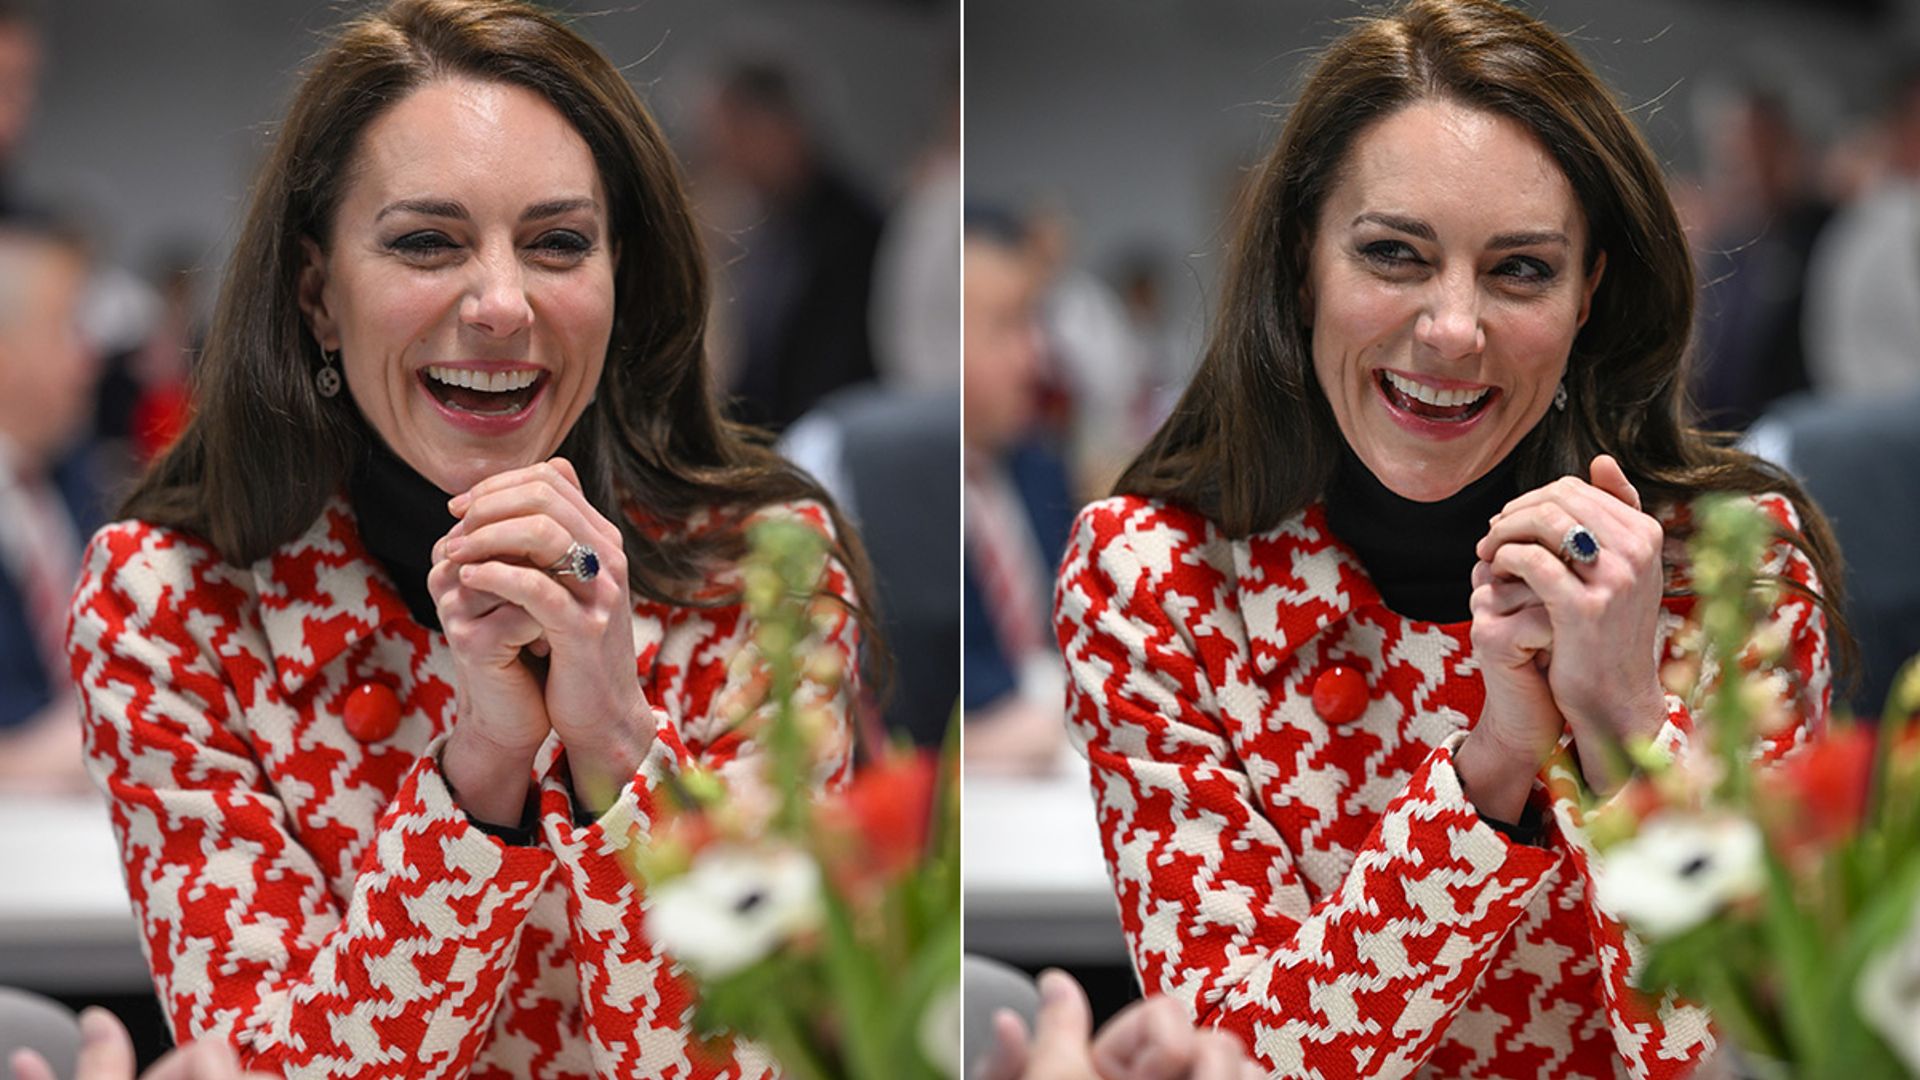 Princess Kate rewears coat from pregnancy with Prince Louis - royal fans have questions